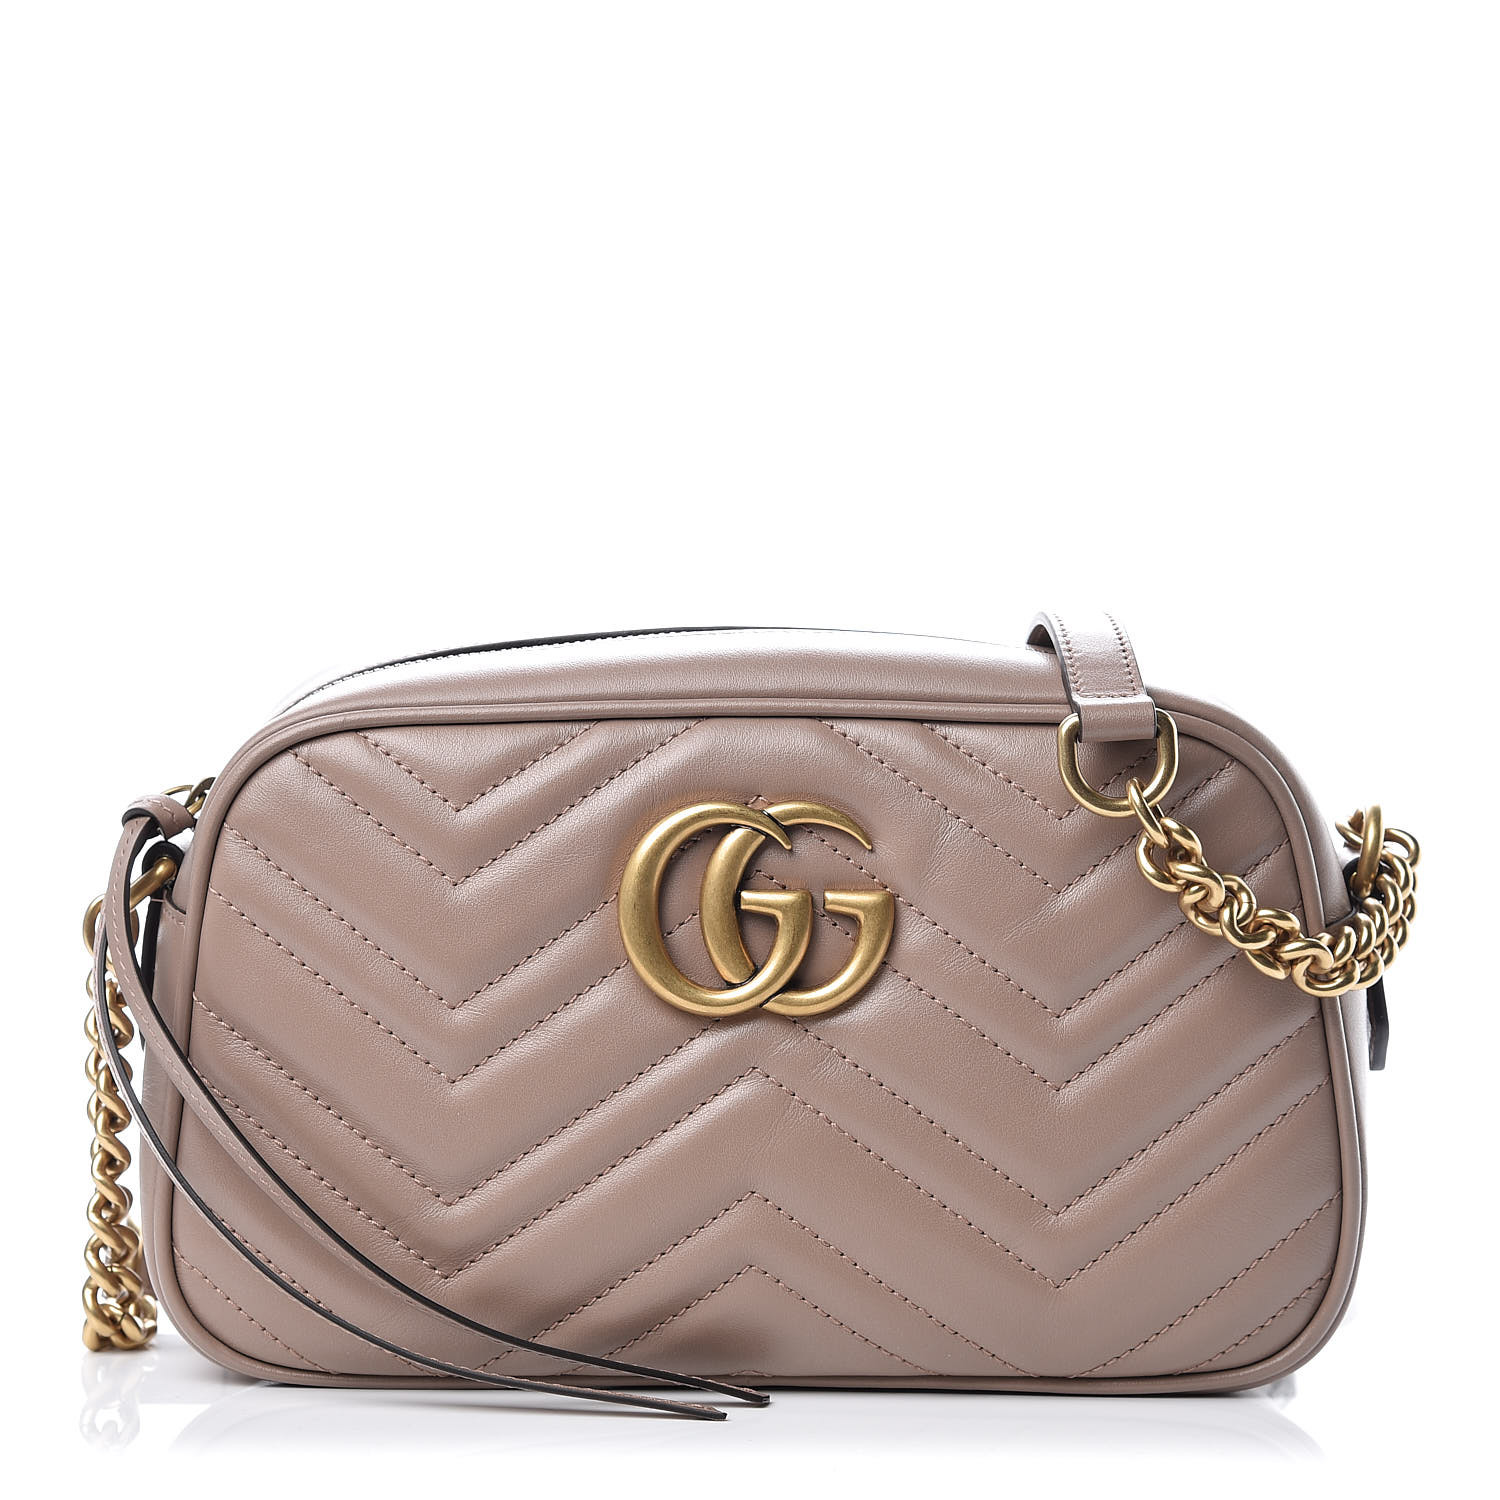 Gucci GG Marmont Small Matelasse Shoulder Bag Nude 447632 